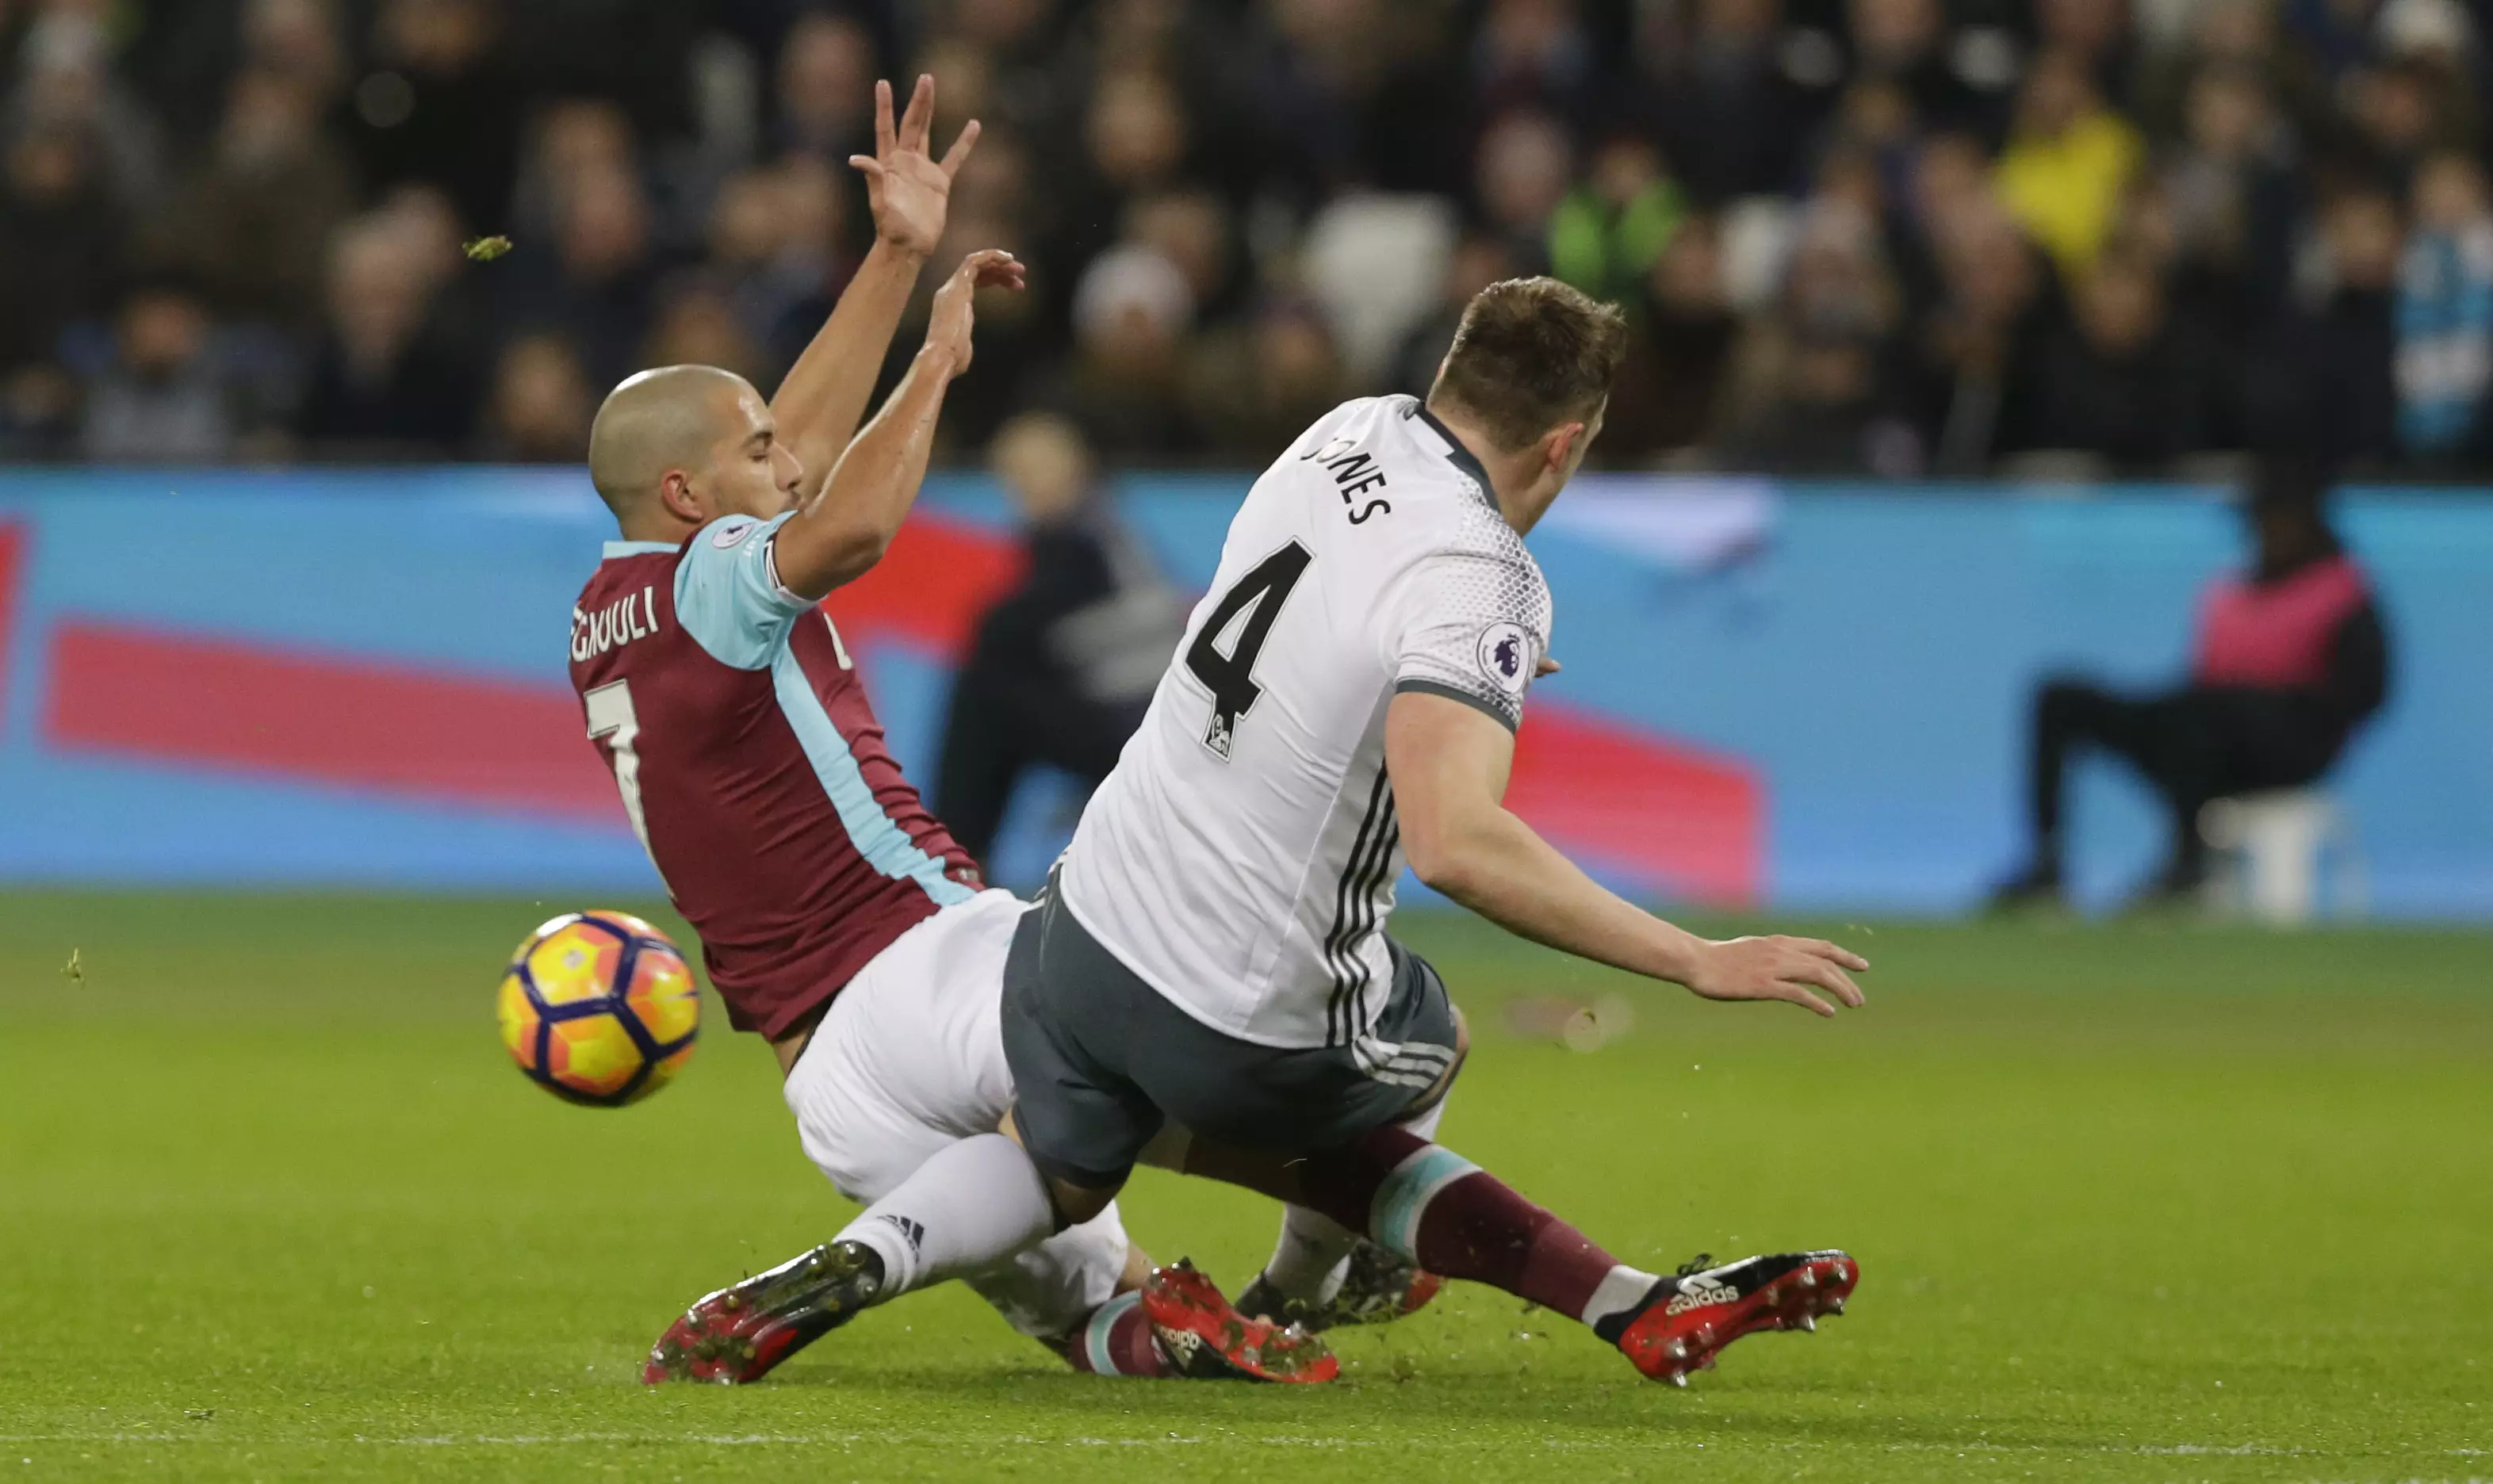 WATCH: Sofiane Feghouli Gets Controversial Sending Off Against Manchester United